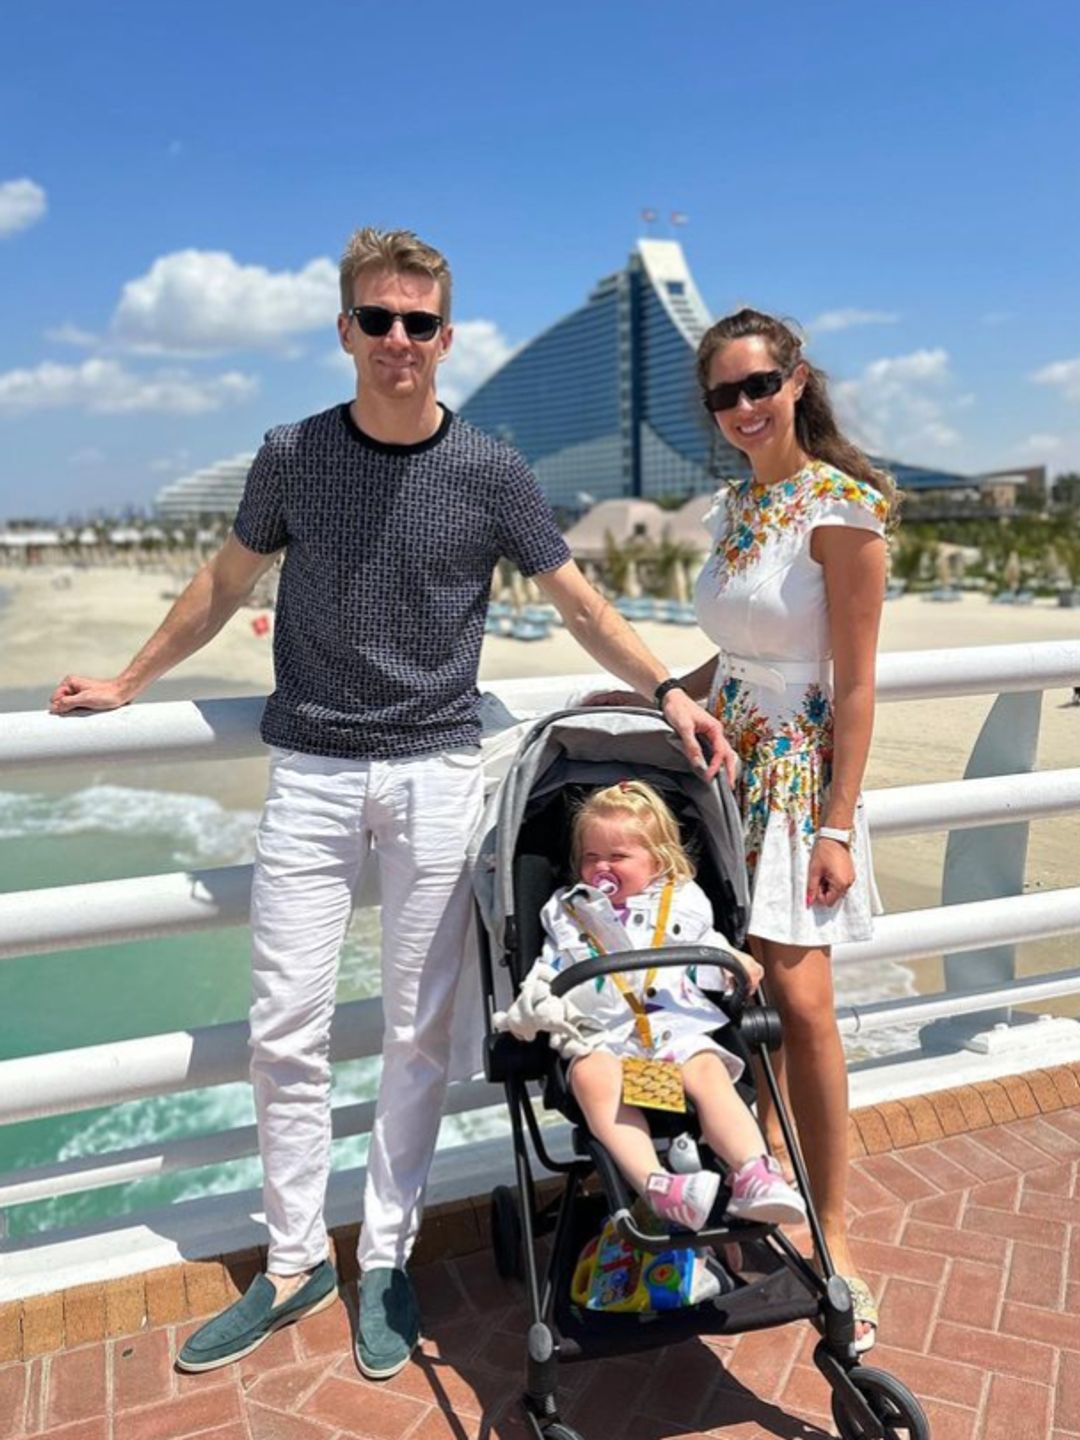 Nico Hulkenberg with wife and daughter on the beach